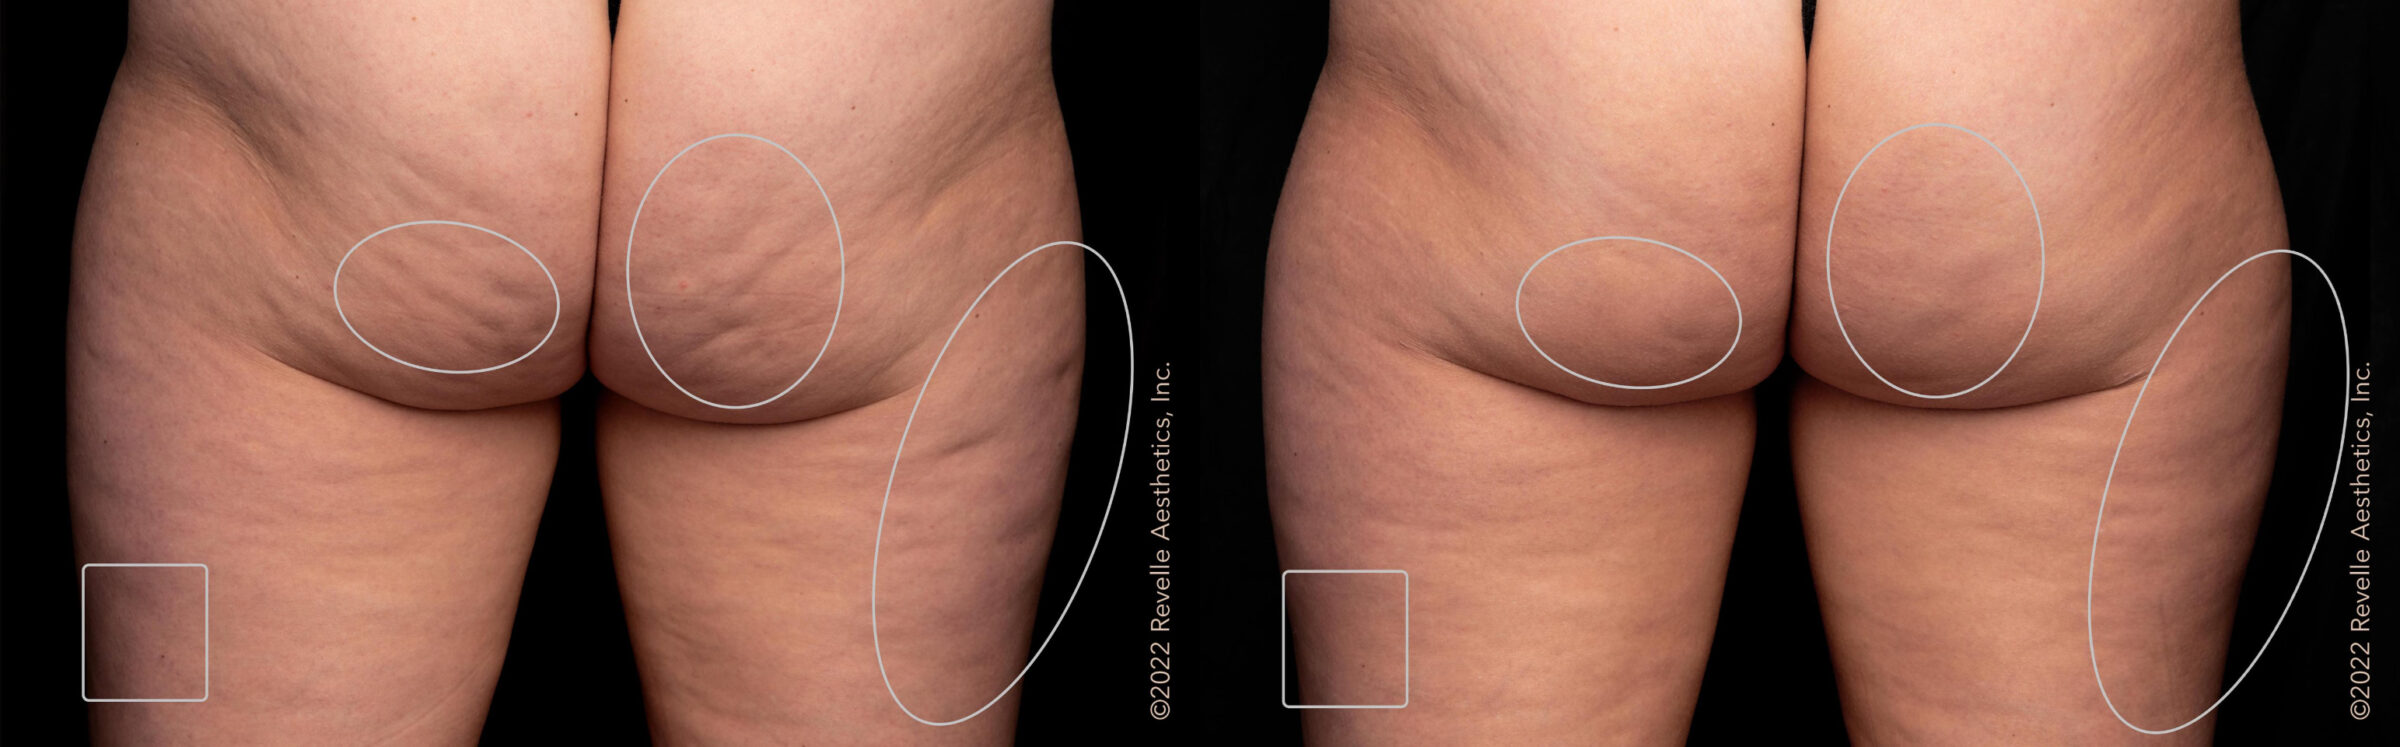 Before and after aveli cellulite treatment on buttocks